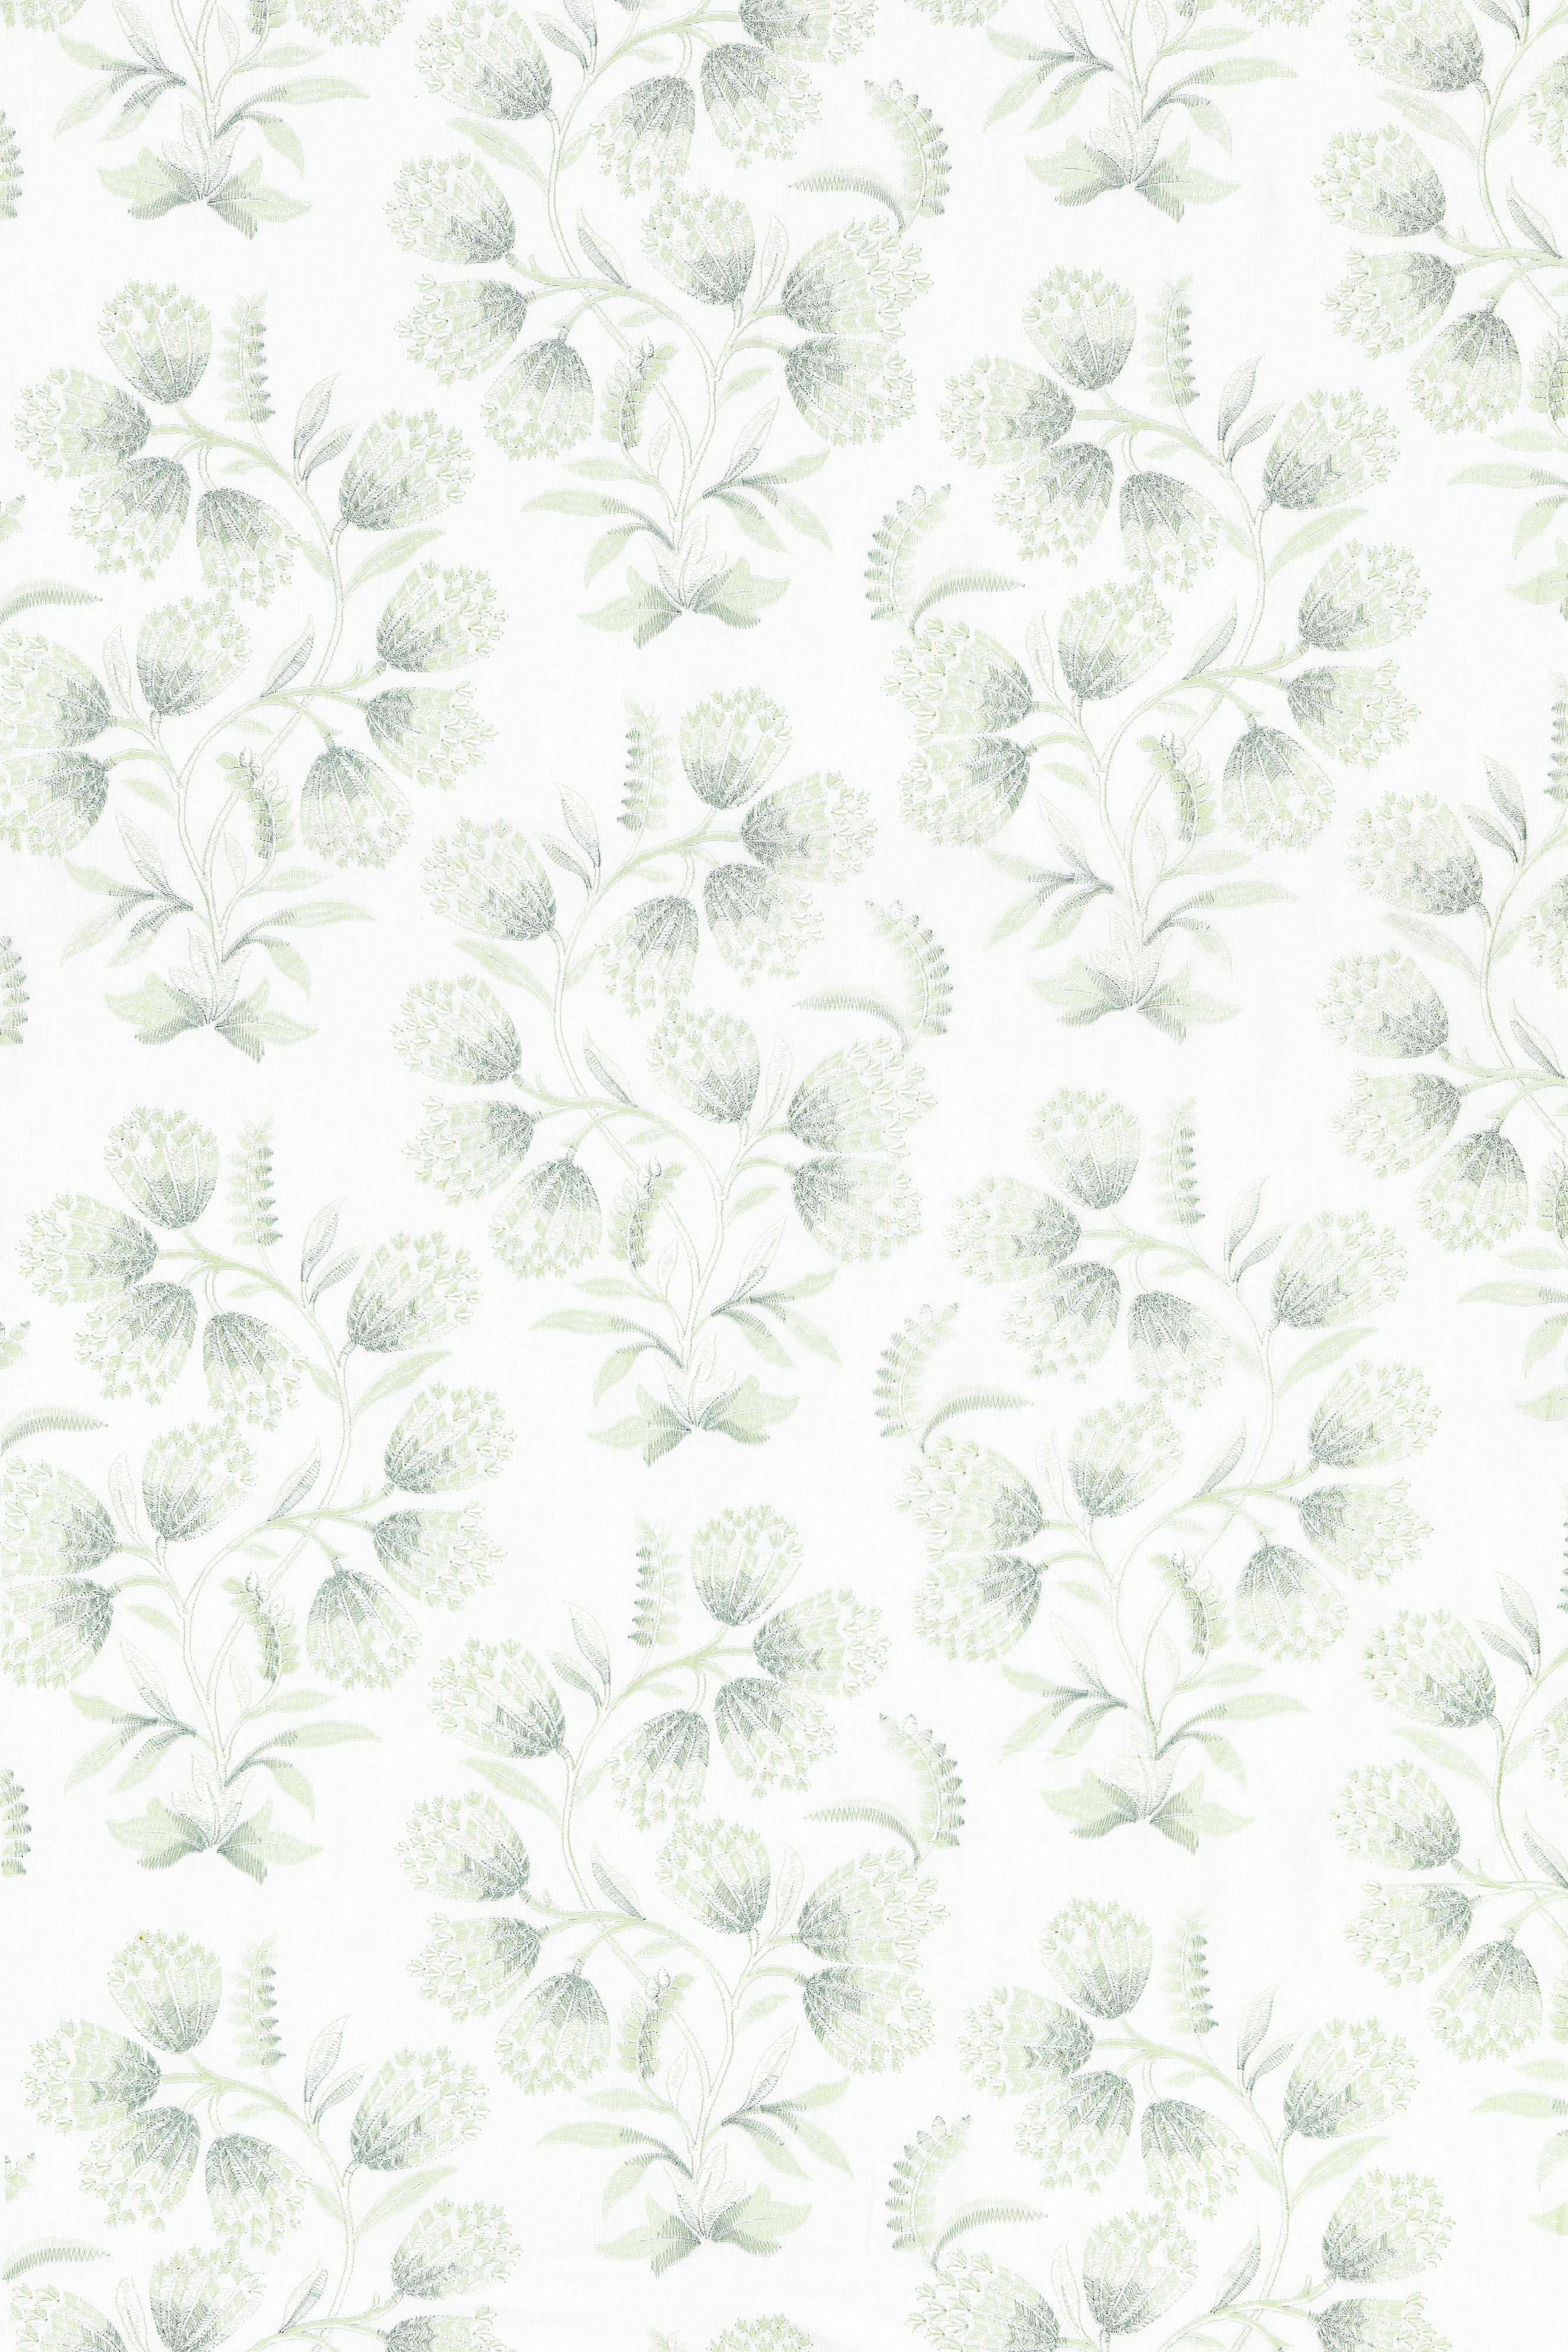 Hana Embroidery fabric in eucalyptus color - pattern number SC 000227233 - by Scalamandre in the Scalamandre Fabrics Book 1 collection